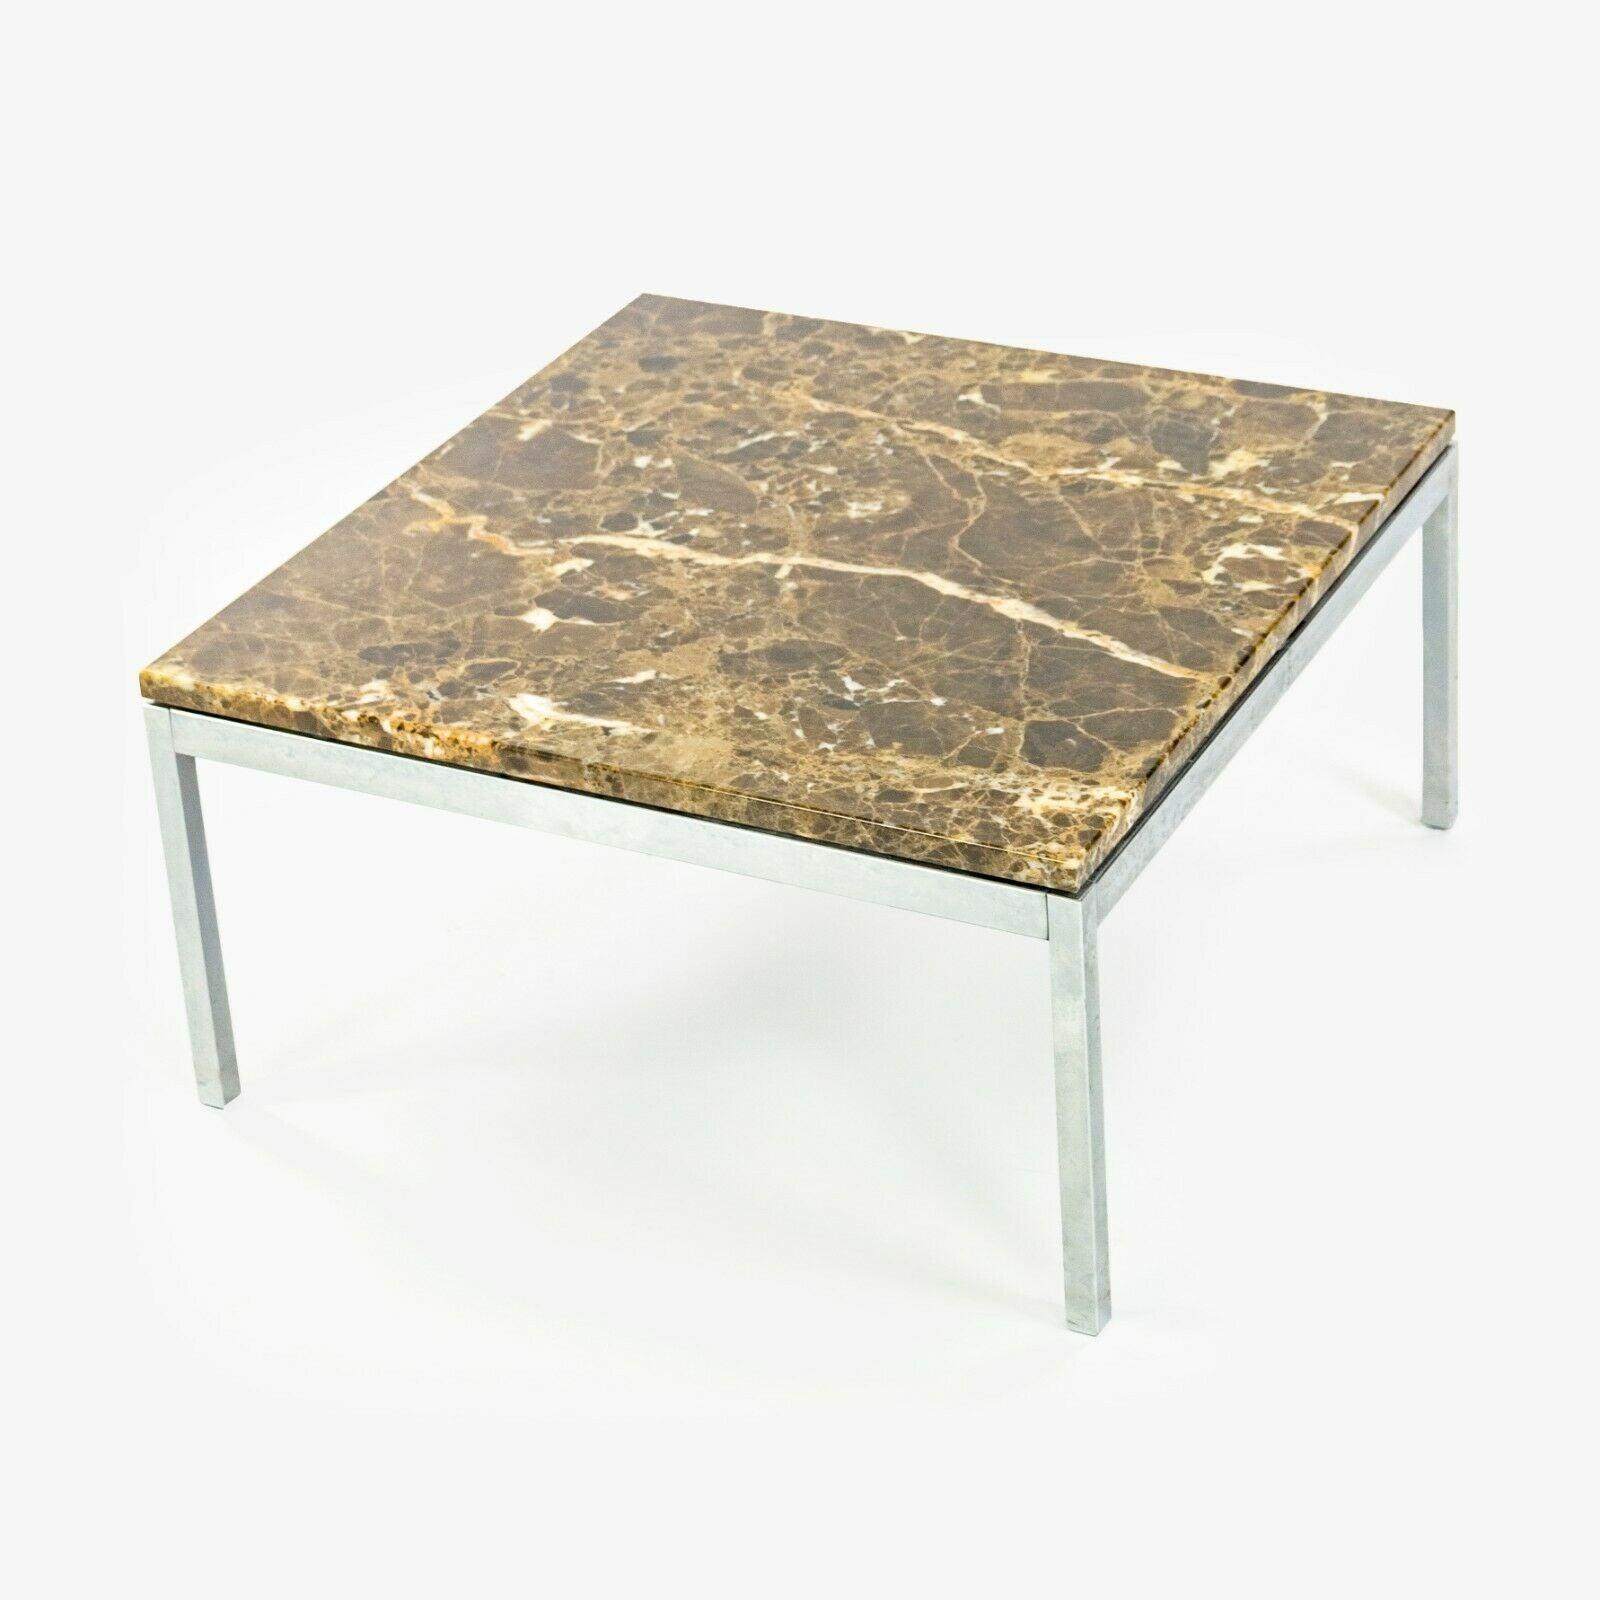 Listed for sale is a Florence Knoll for Knoll Studio 23.5 x 23.5 x 12 inch low coffee table / end table. This example has a gorgeous espresso marble top and base is in lovely condition. The piece shows very little wear and top is beautifully